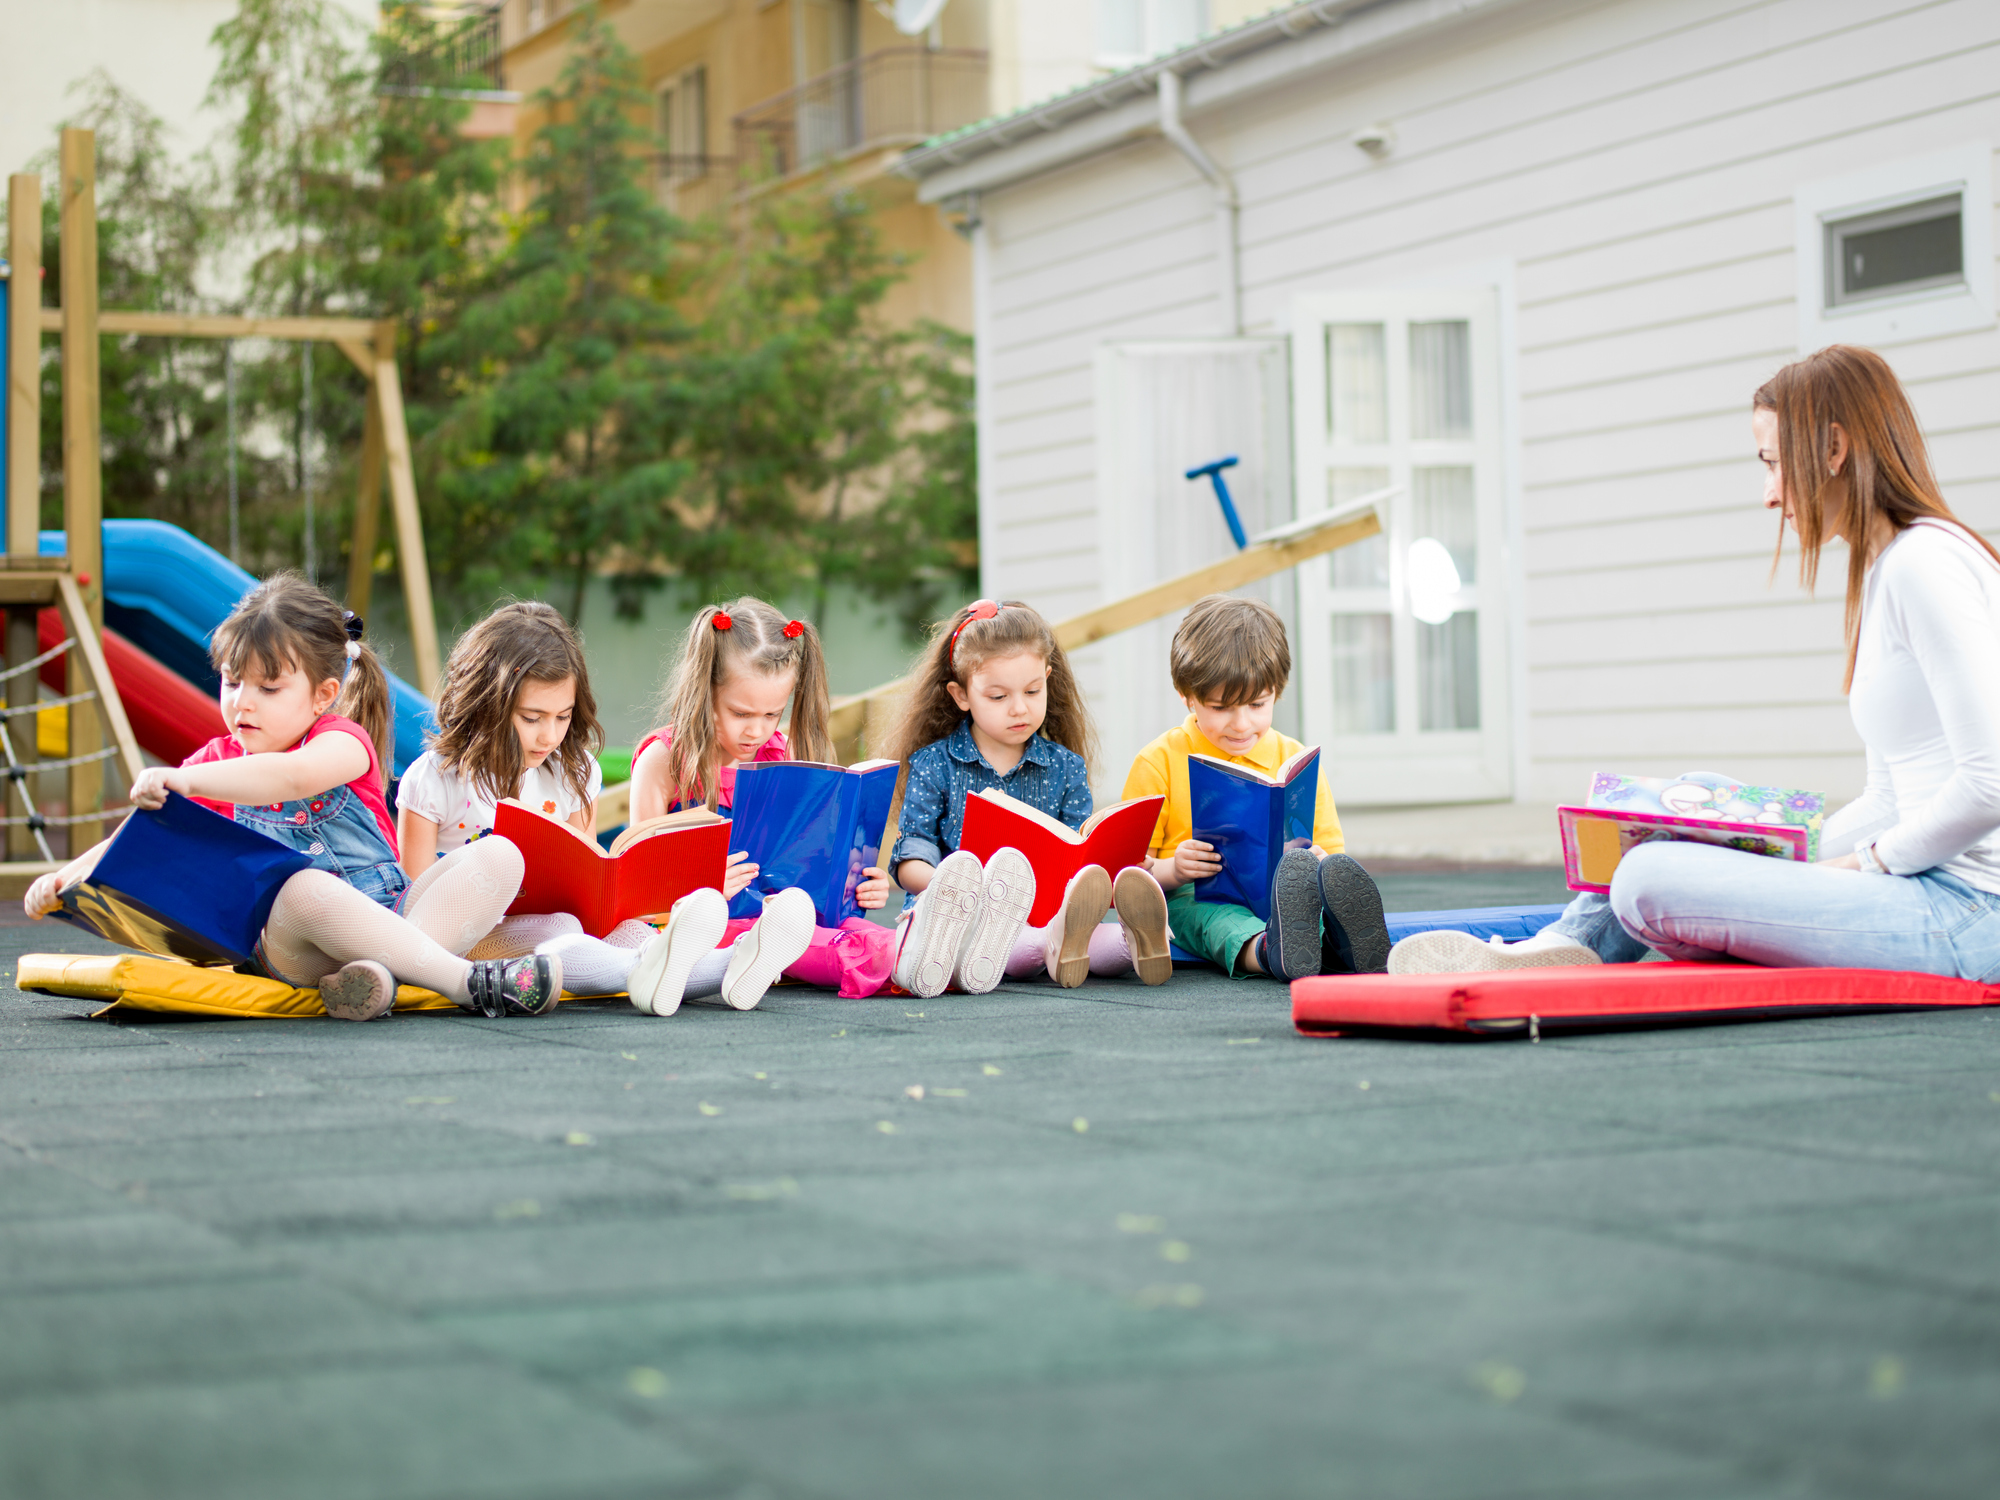 Early Childhood Education Places Increased Emphasis On Outdoor Learning